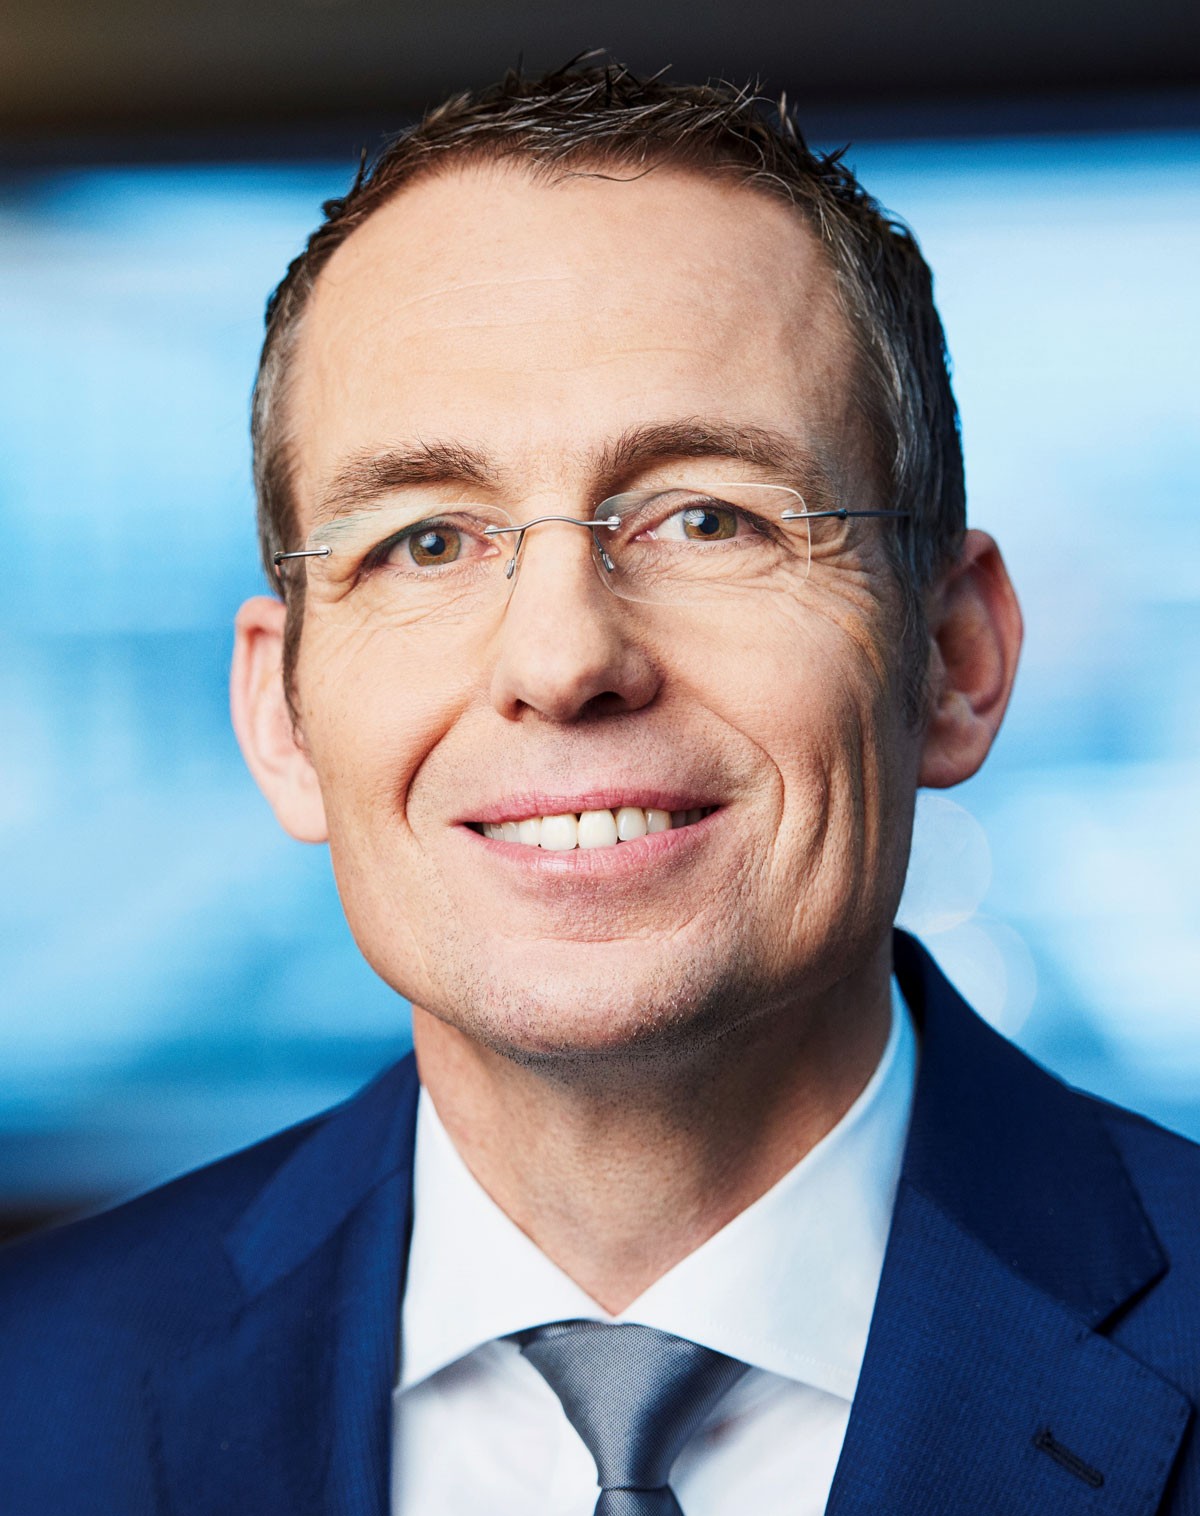 Fredy Hasenmaile, Leiter Immobilienanalyse Credit Suisse AG